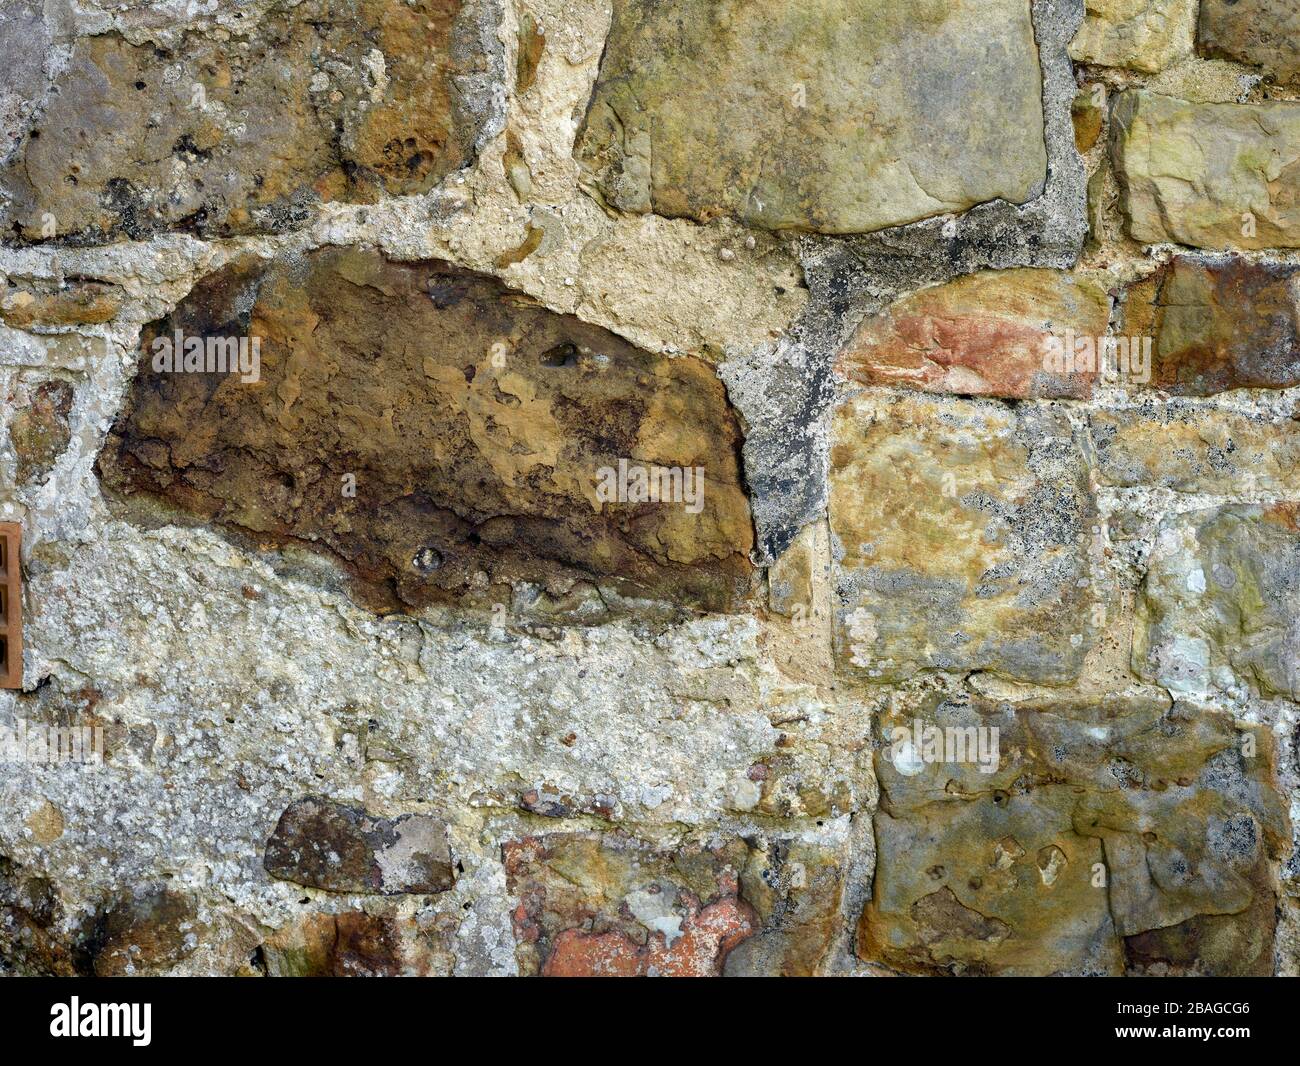 Abstract textured background od stone with lichen and moss beginning to populate, nature still-life Stock Photo